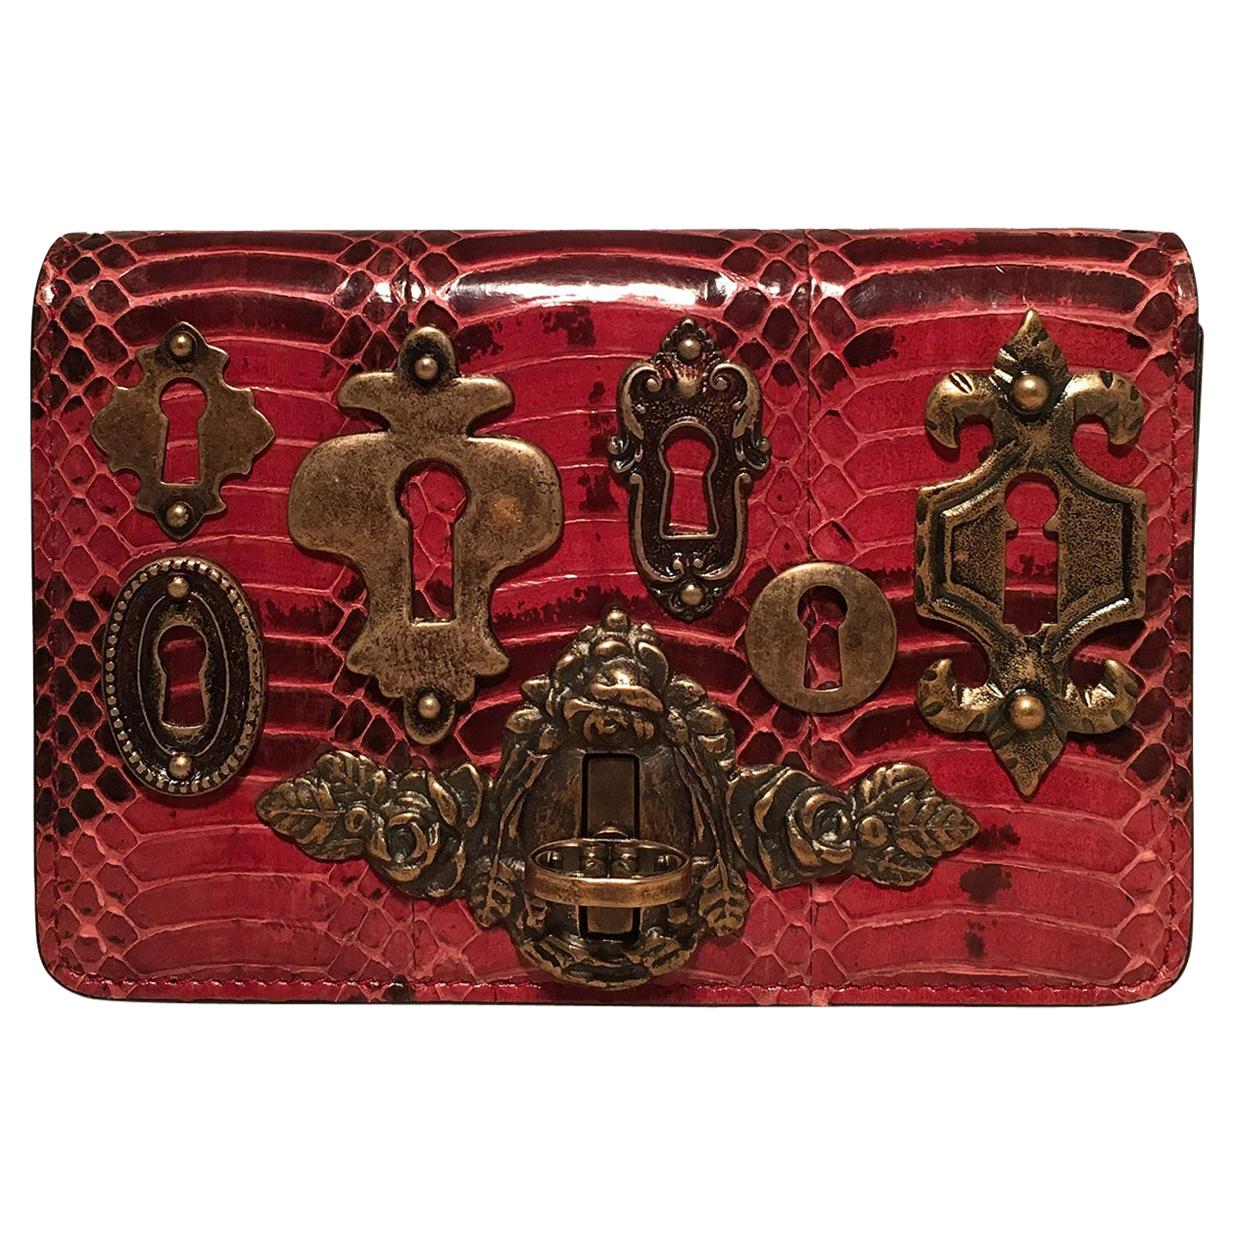 Dolce And Gabbana Handbags - 398 For Sale on 1stDibs | dolce 